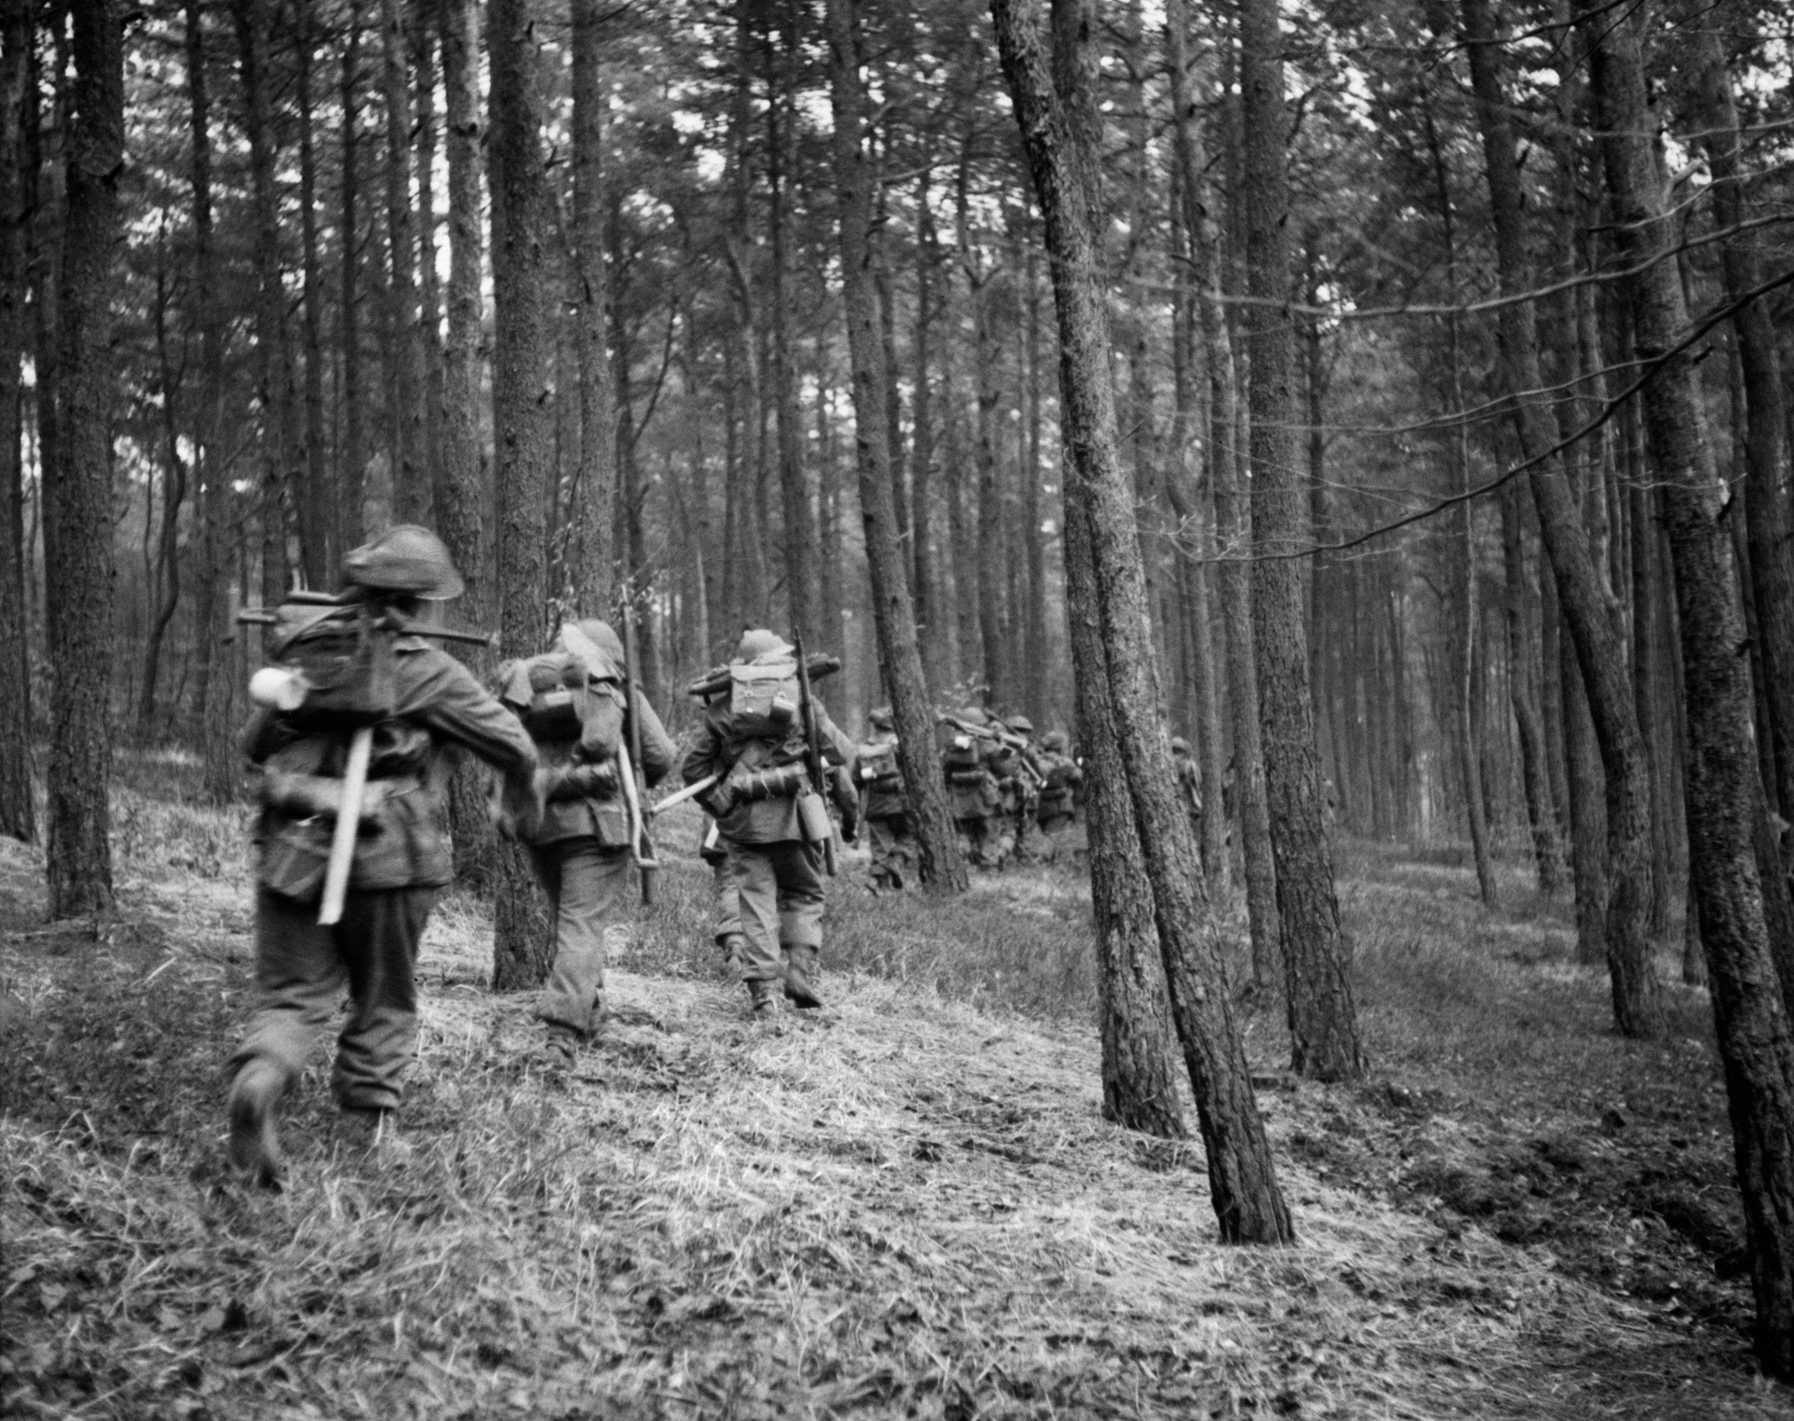 British soldiers advance through a stand of trees in the Reichswald on February 8. The dense forest and soggy terrain made the going rough for the foot soldiers.